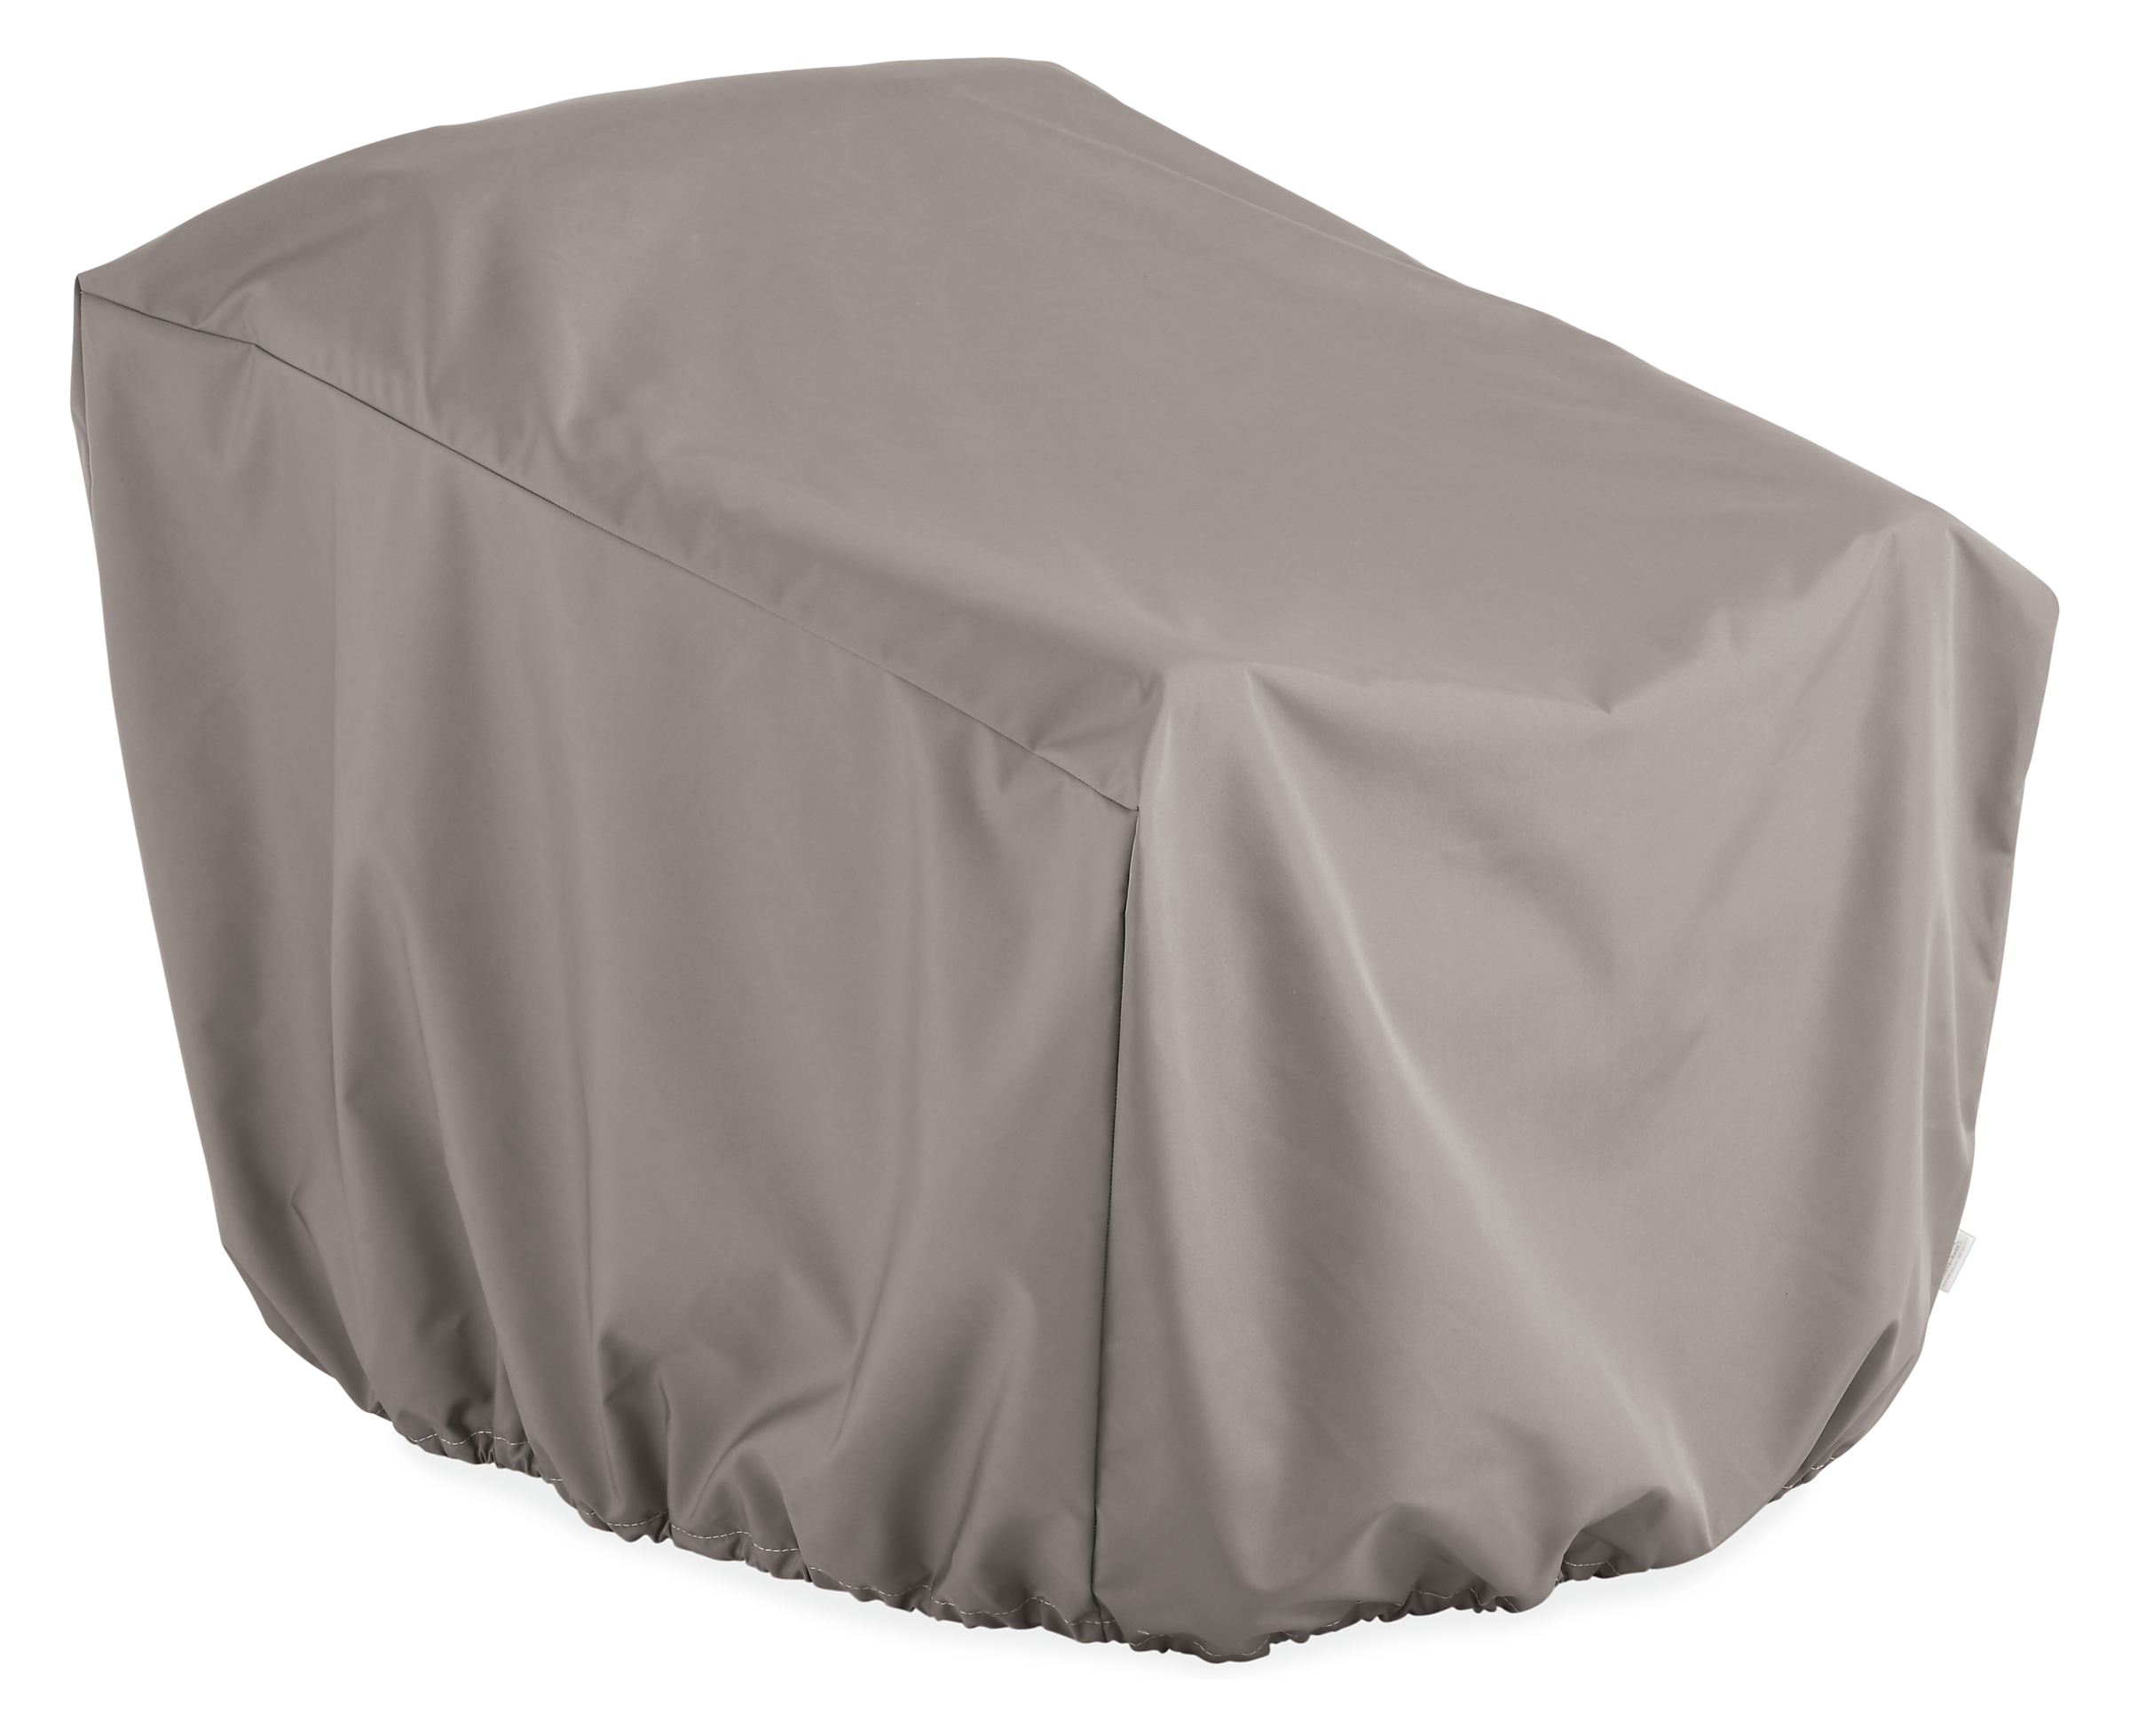 Outdoor Cover for Chair 38w 38d 33h with Drawstring